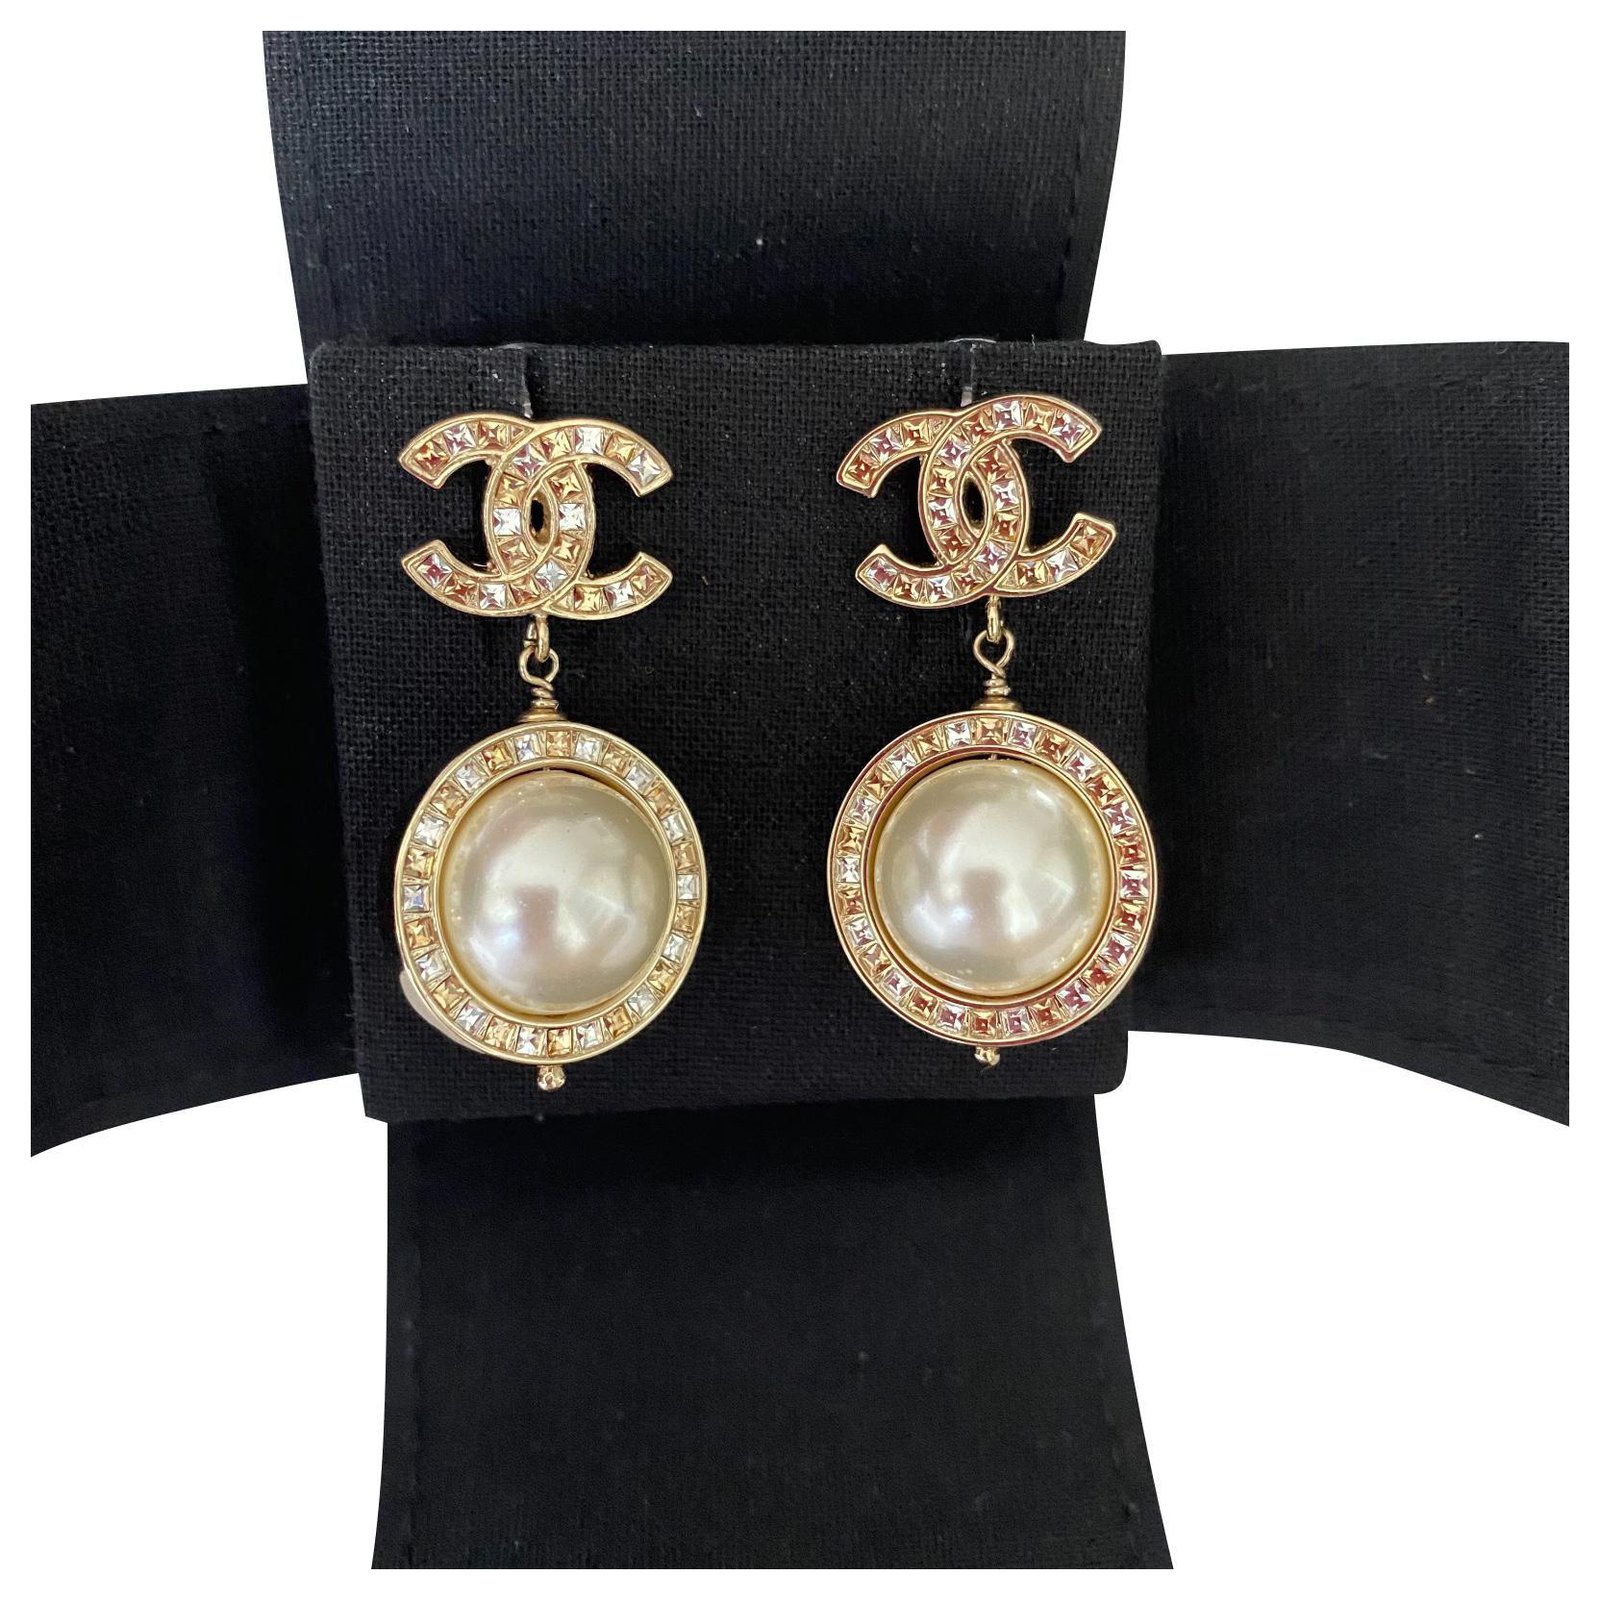 CC earrings with pearl